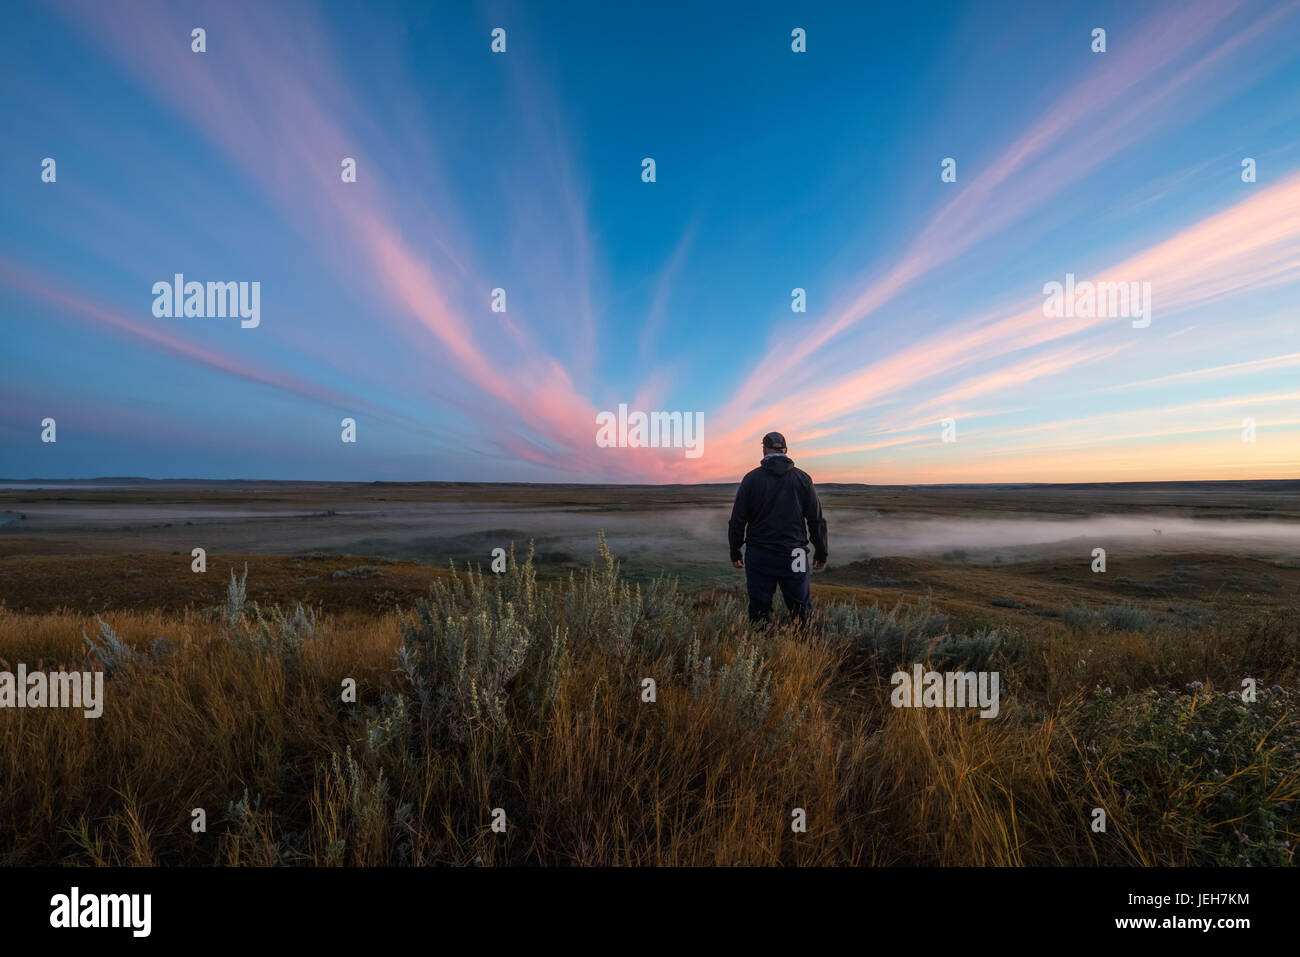 A man stands watching watching the sunrise colour over the Frenchman River Valley in Grasslands National Park; Saskatchewan, Canada Stock Photo